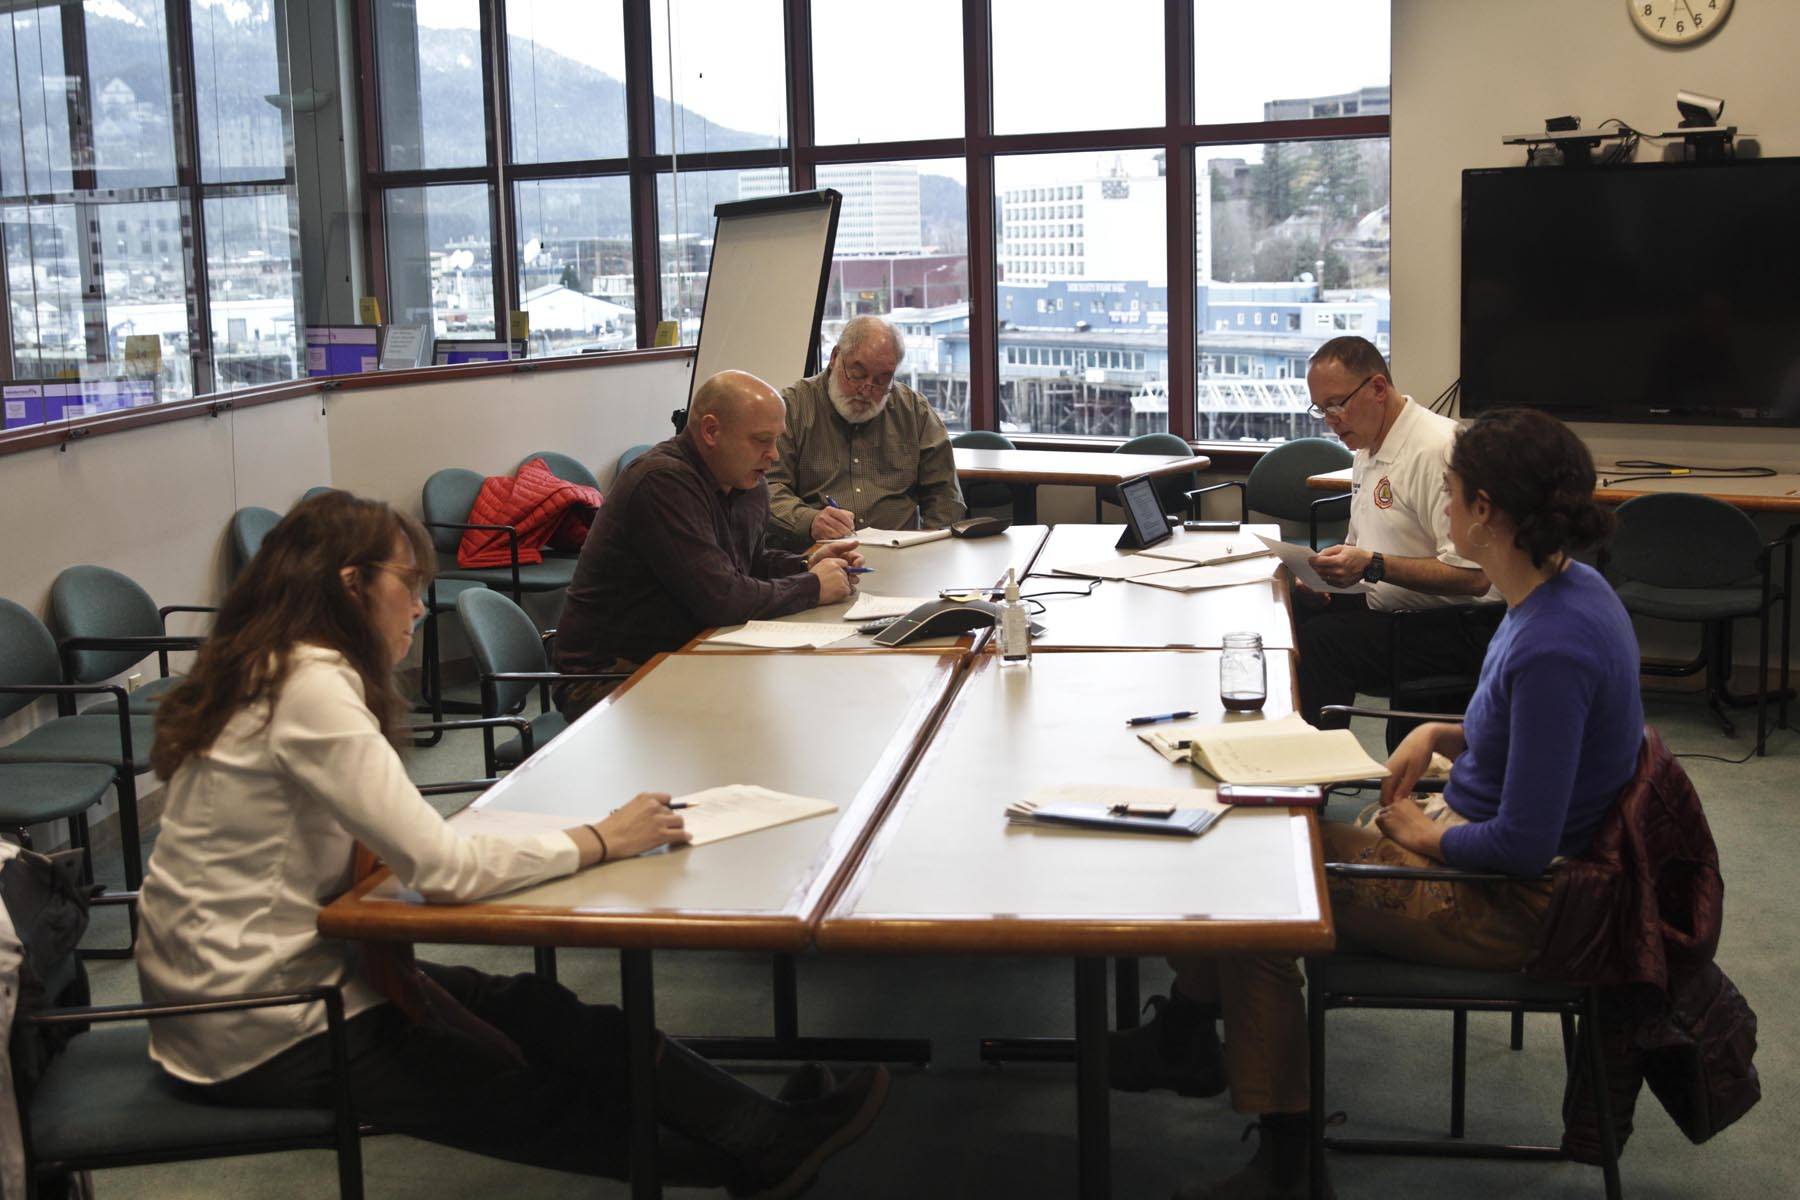 Government officials from the City and Borough of Juneau, medical professionals, and personnel from various shelters and nonprofits meet to discuss Juneau’s plan for preventing the spread of the coronavirus among Juneau citizens experiencing homelessness on March 18, 2020. (Michael S. Lockett | Juneau Empire)